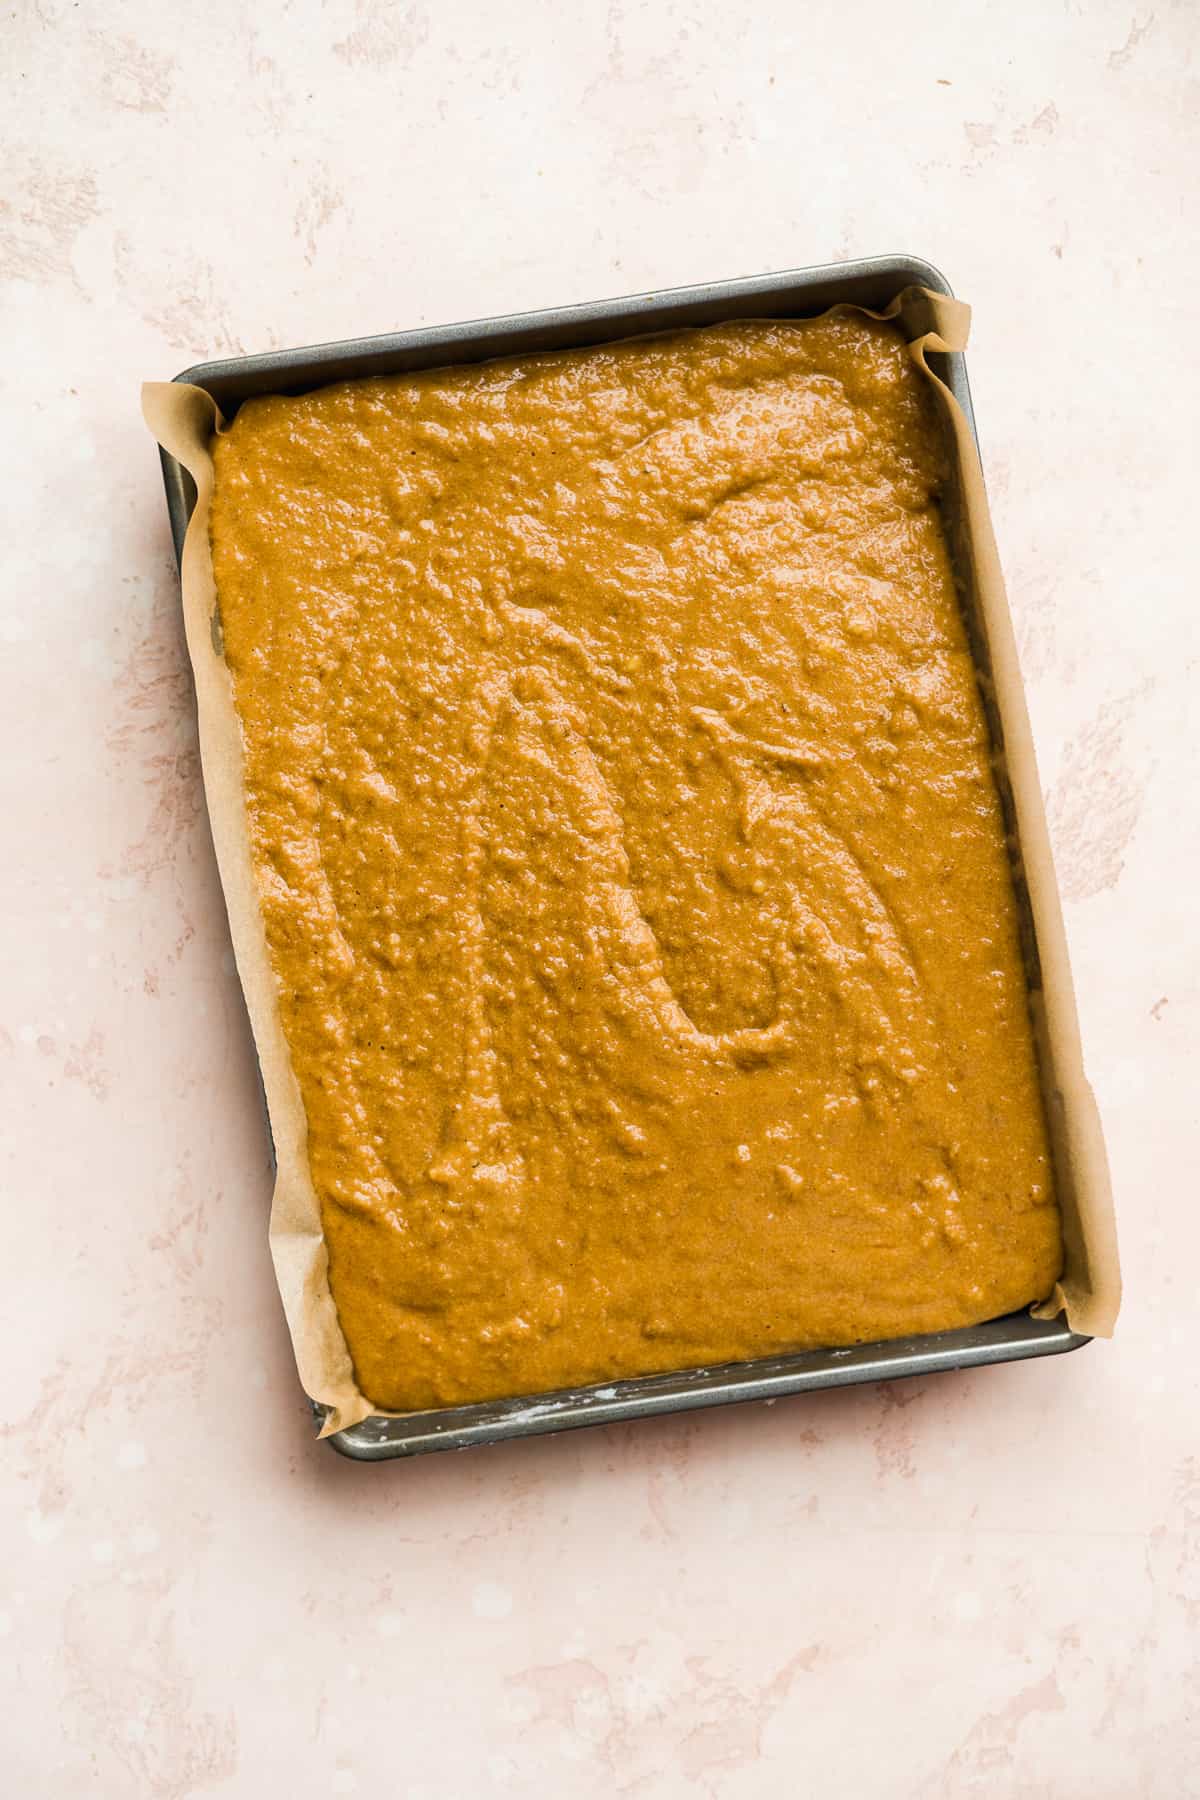 Tan cake batter inside a baking pan with parchment paper.